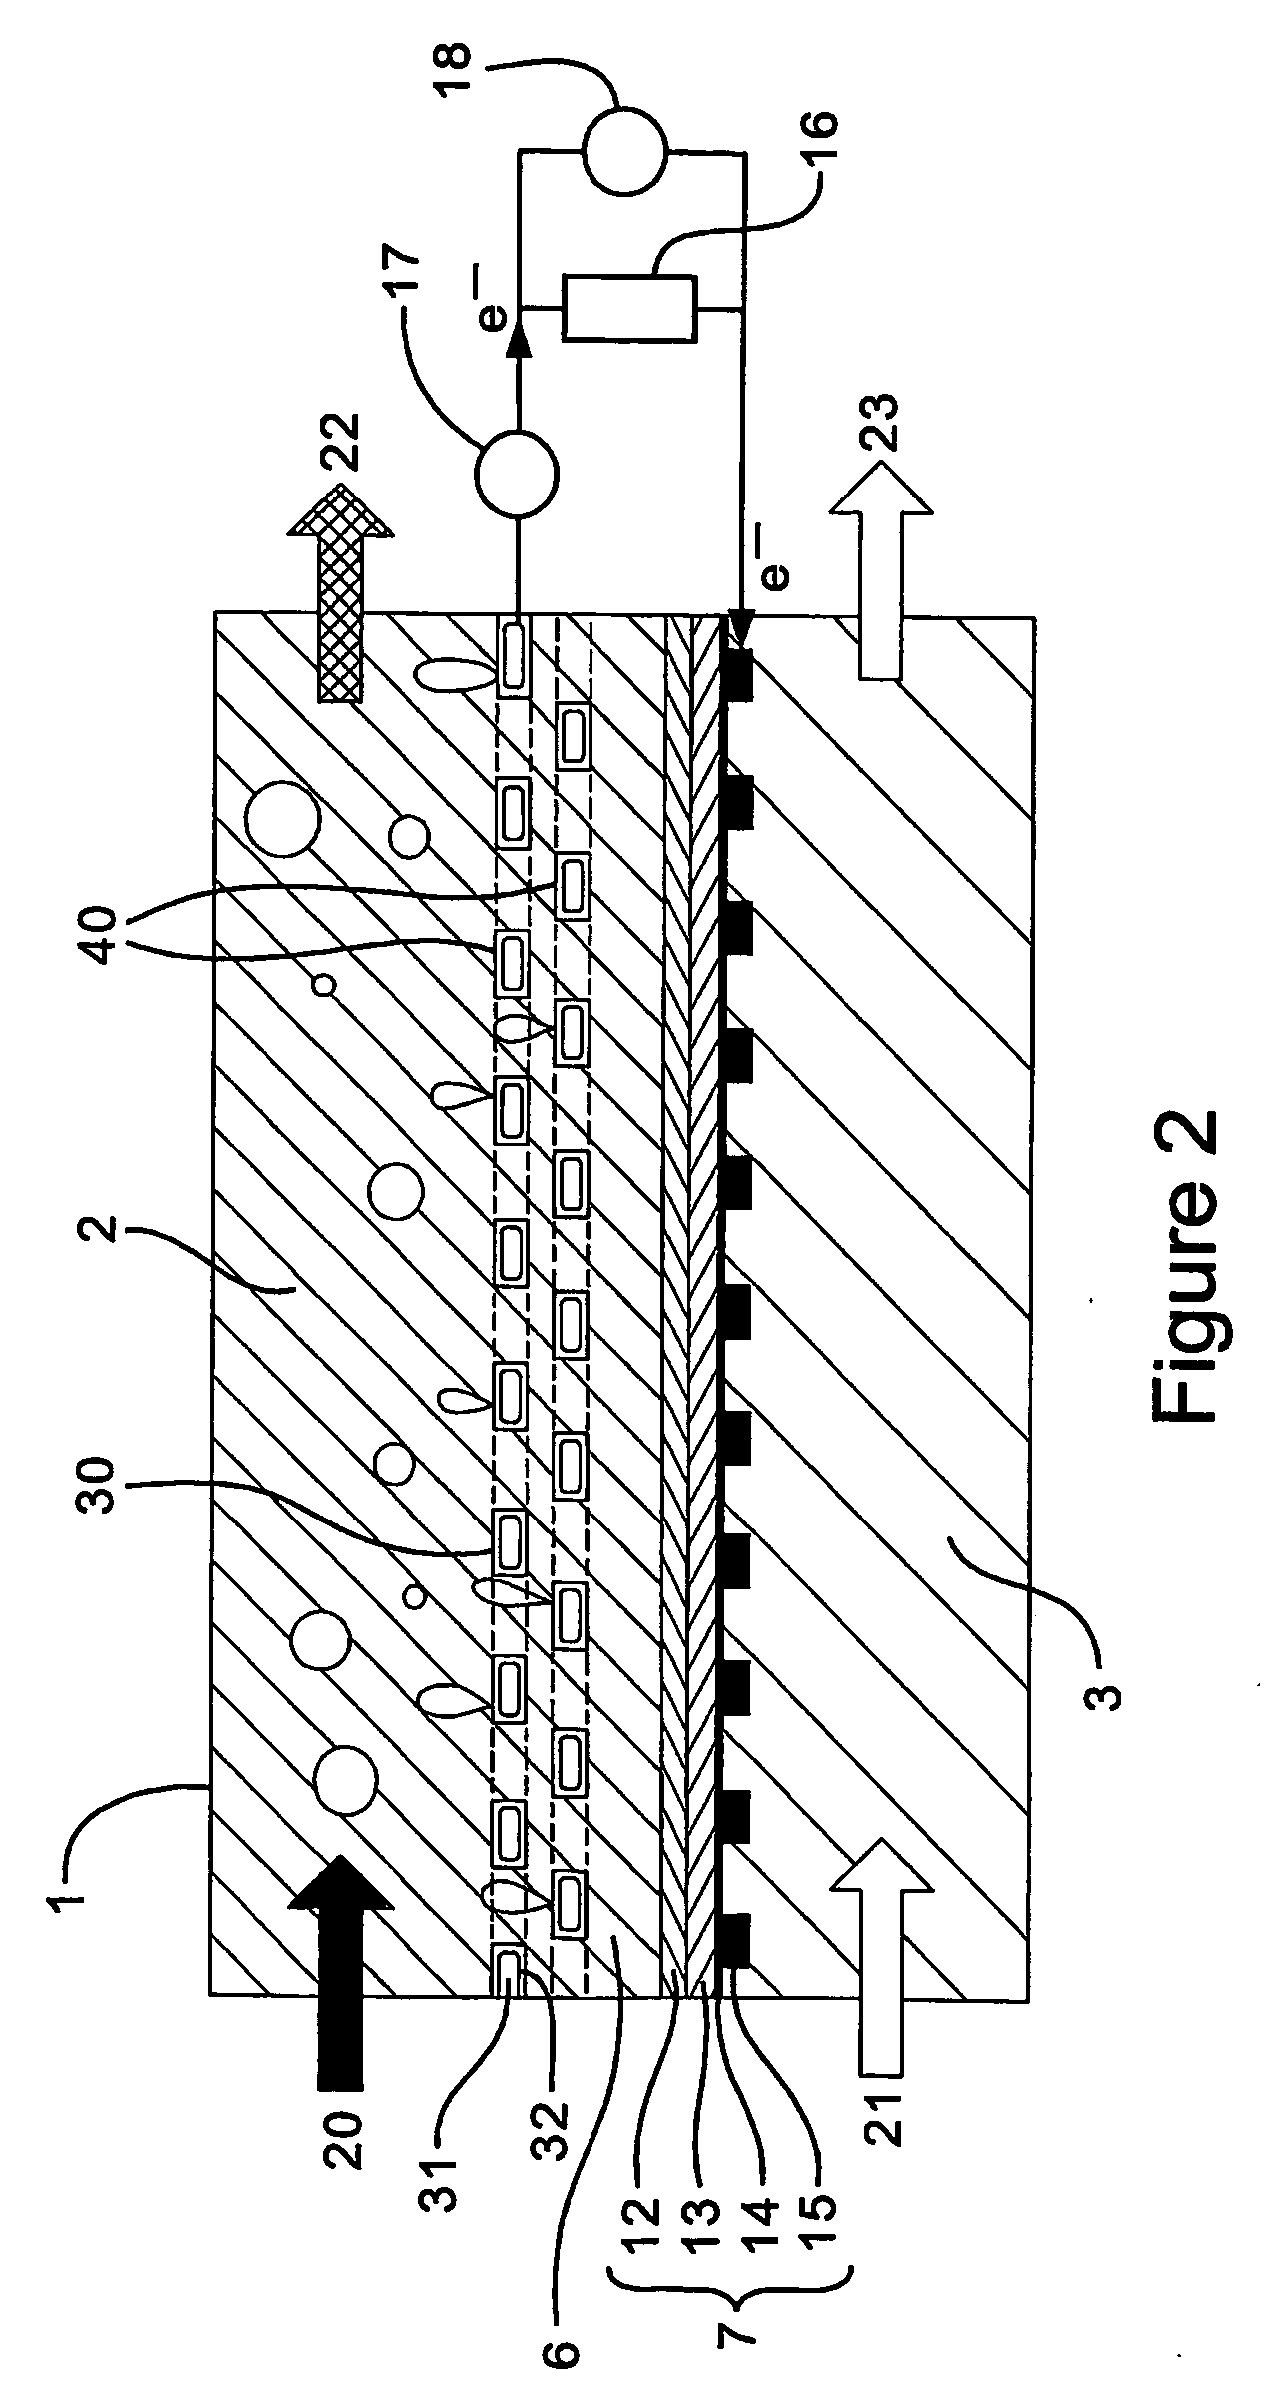 Fuel cell electrode